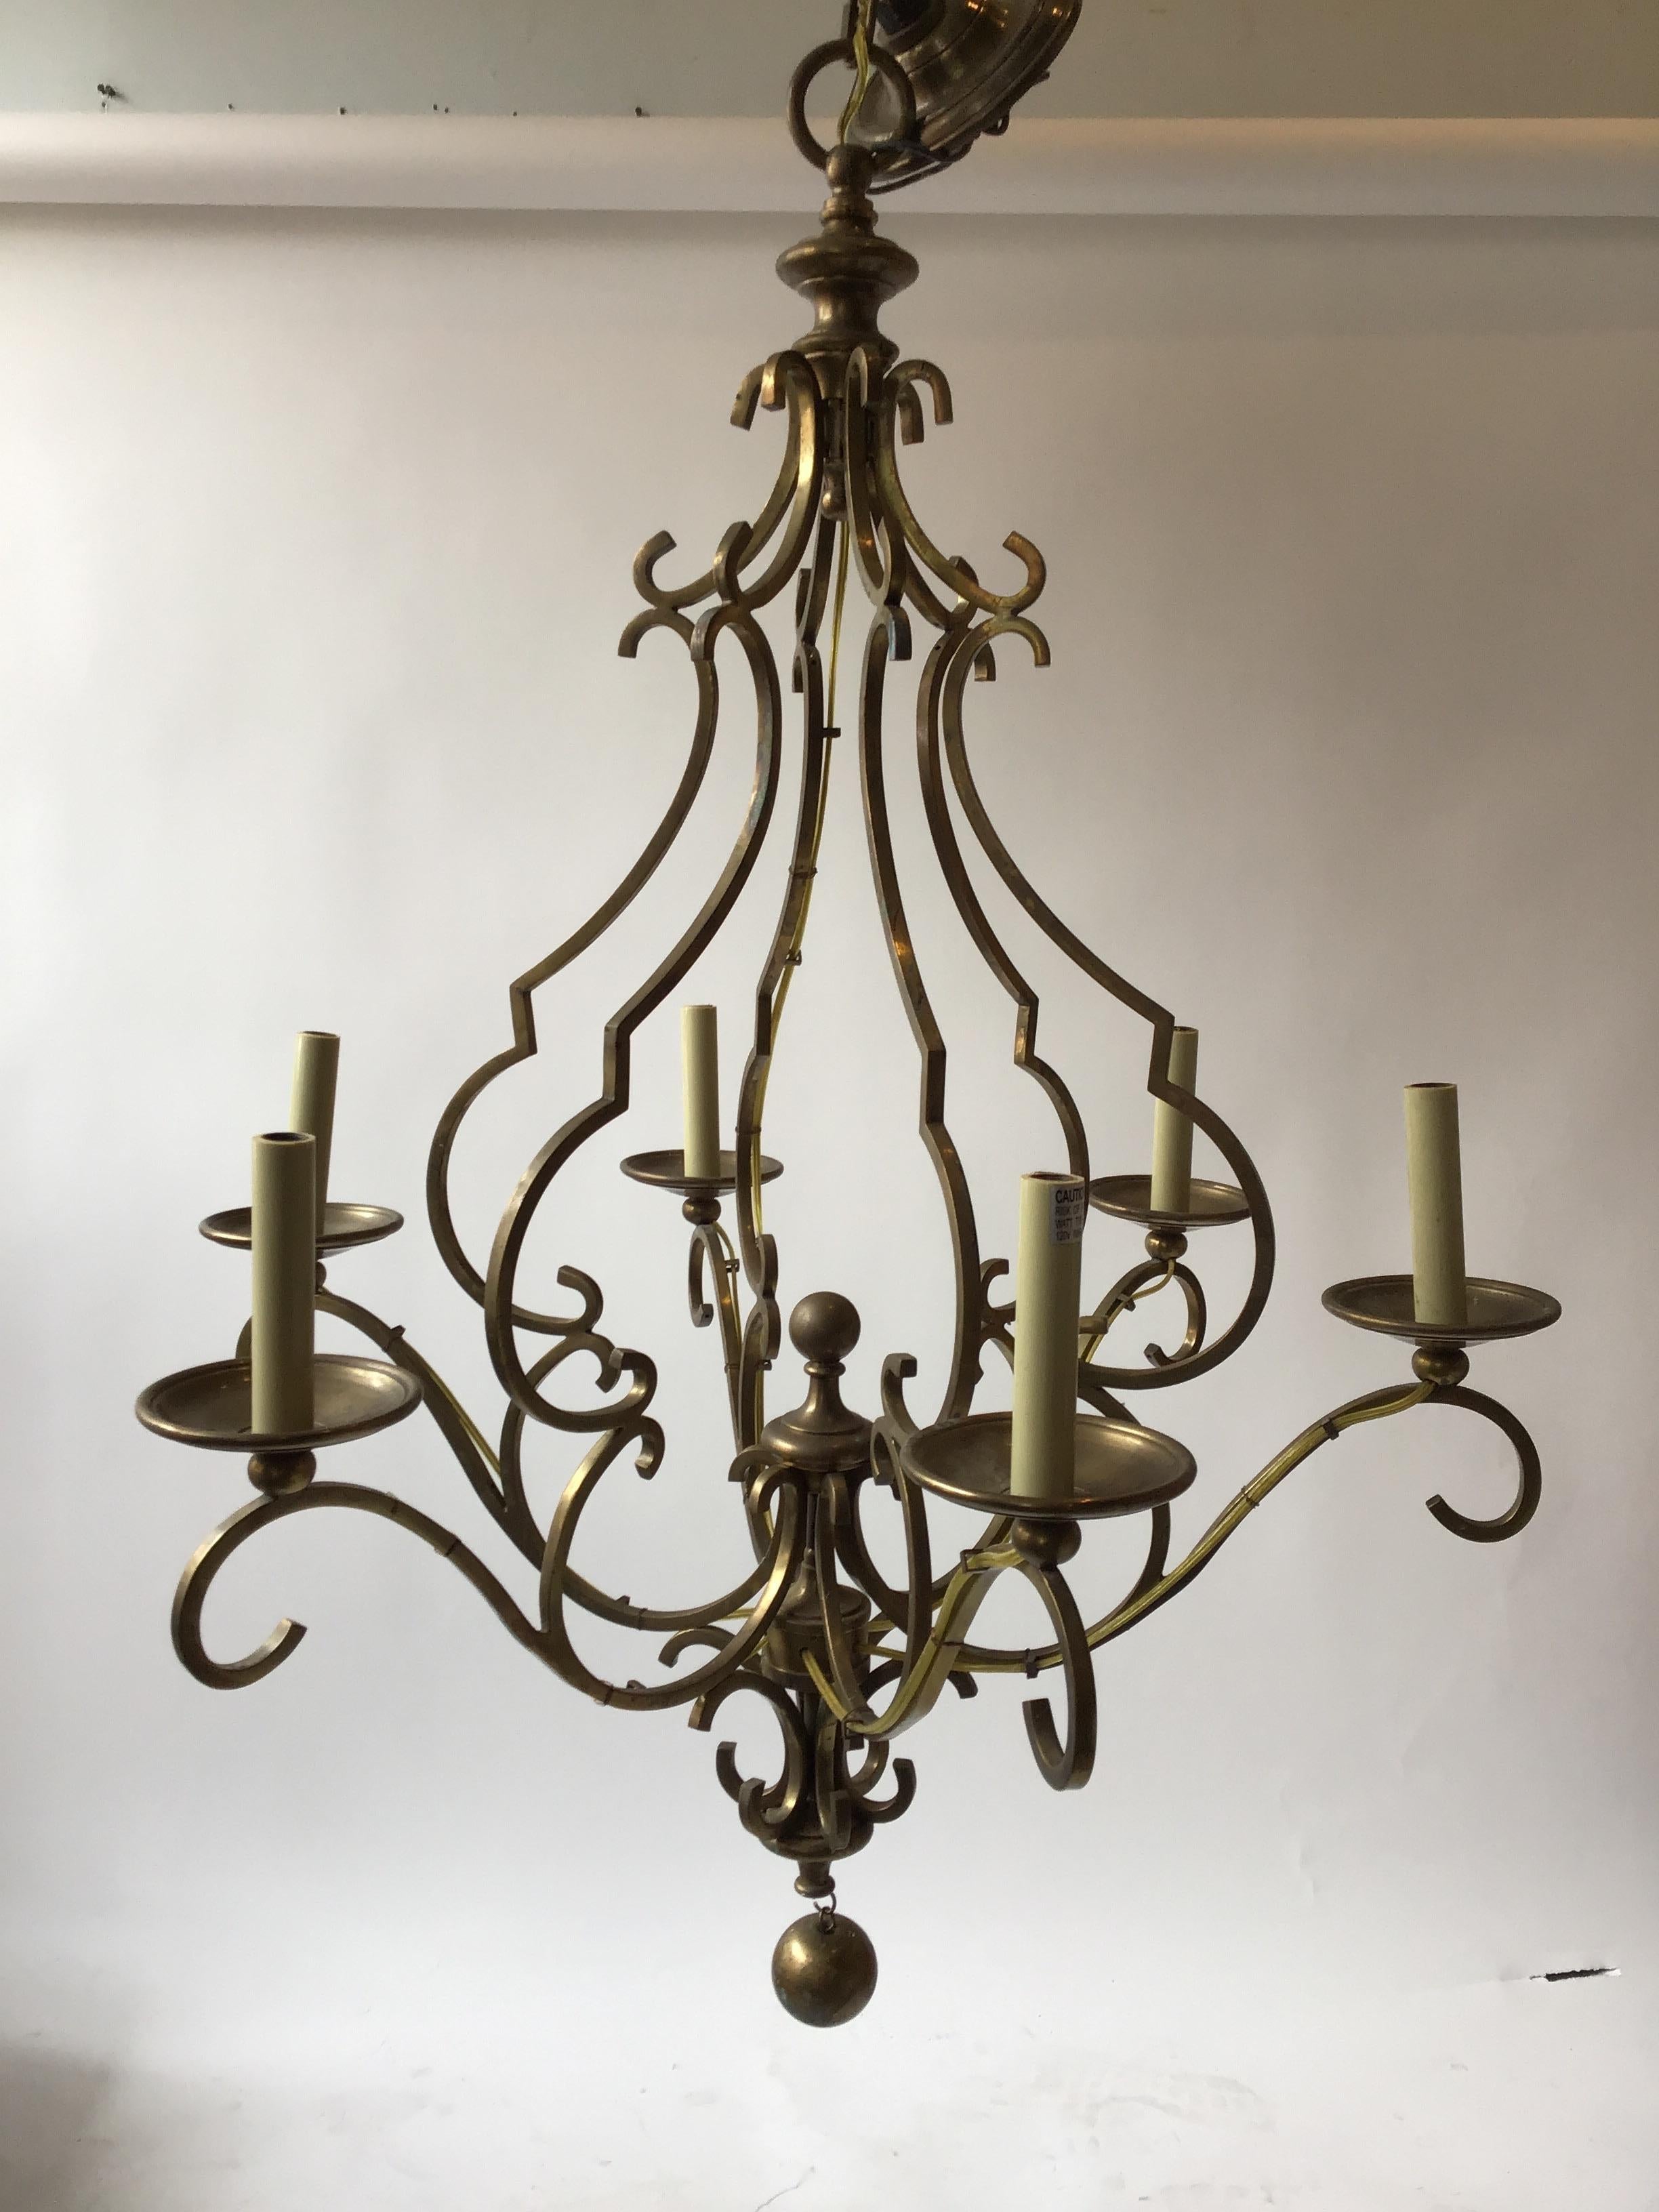 A quality solid brass chandelier from a Greenwich, Connecticut mansion.